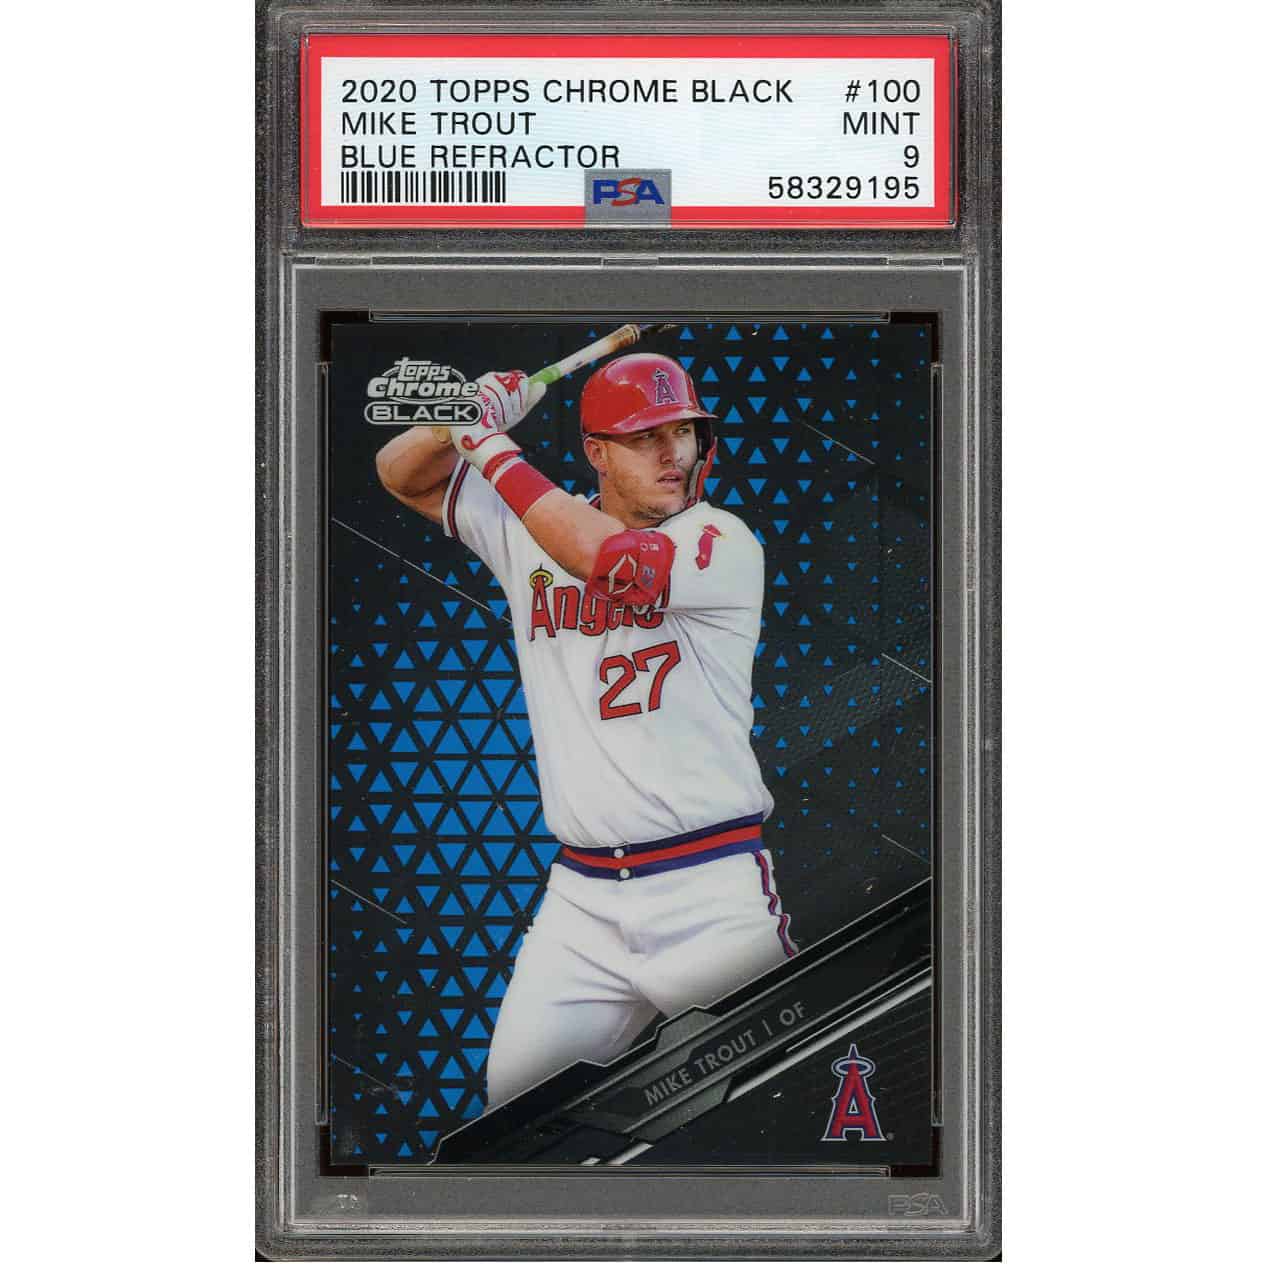 2020 Topps Chrome Black Mike Trout #100 Blue Refractor 14/75 PSA 9